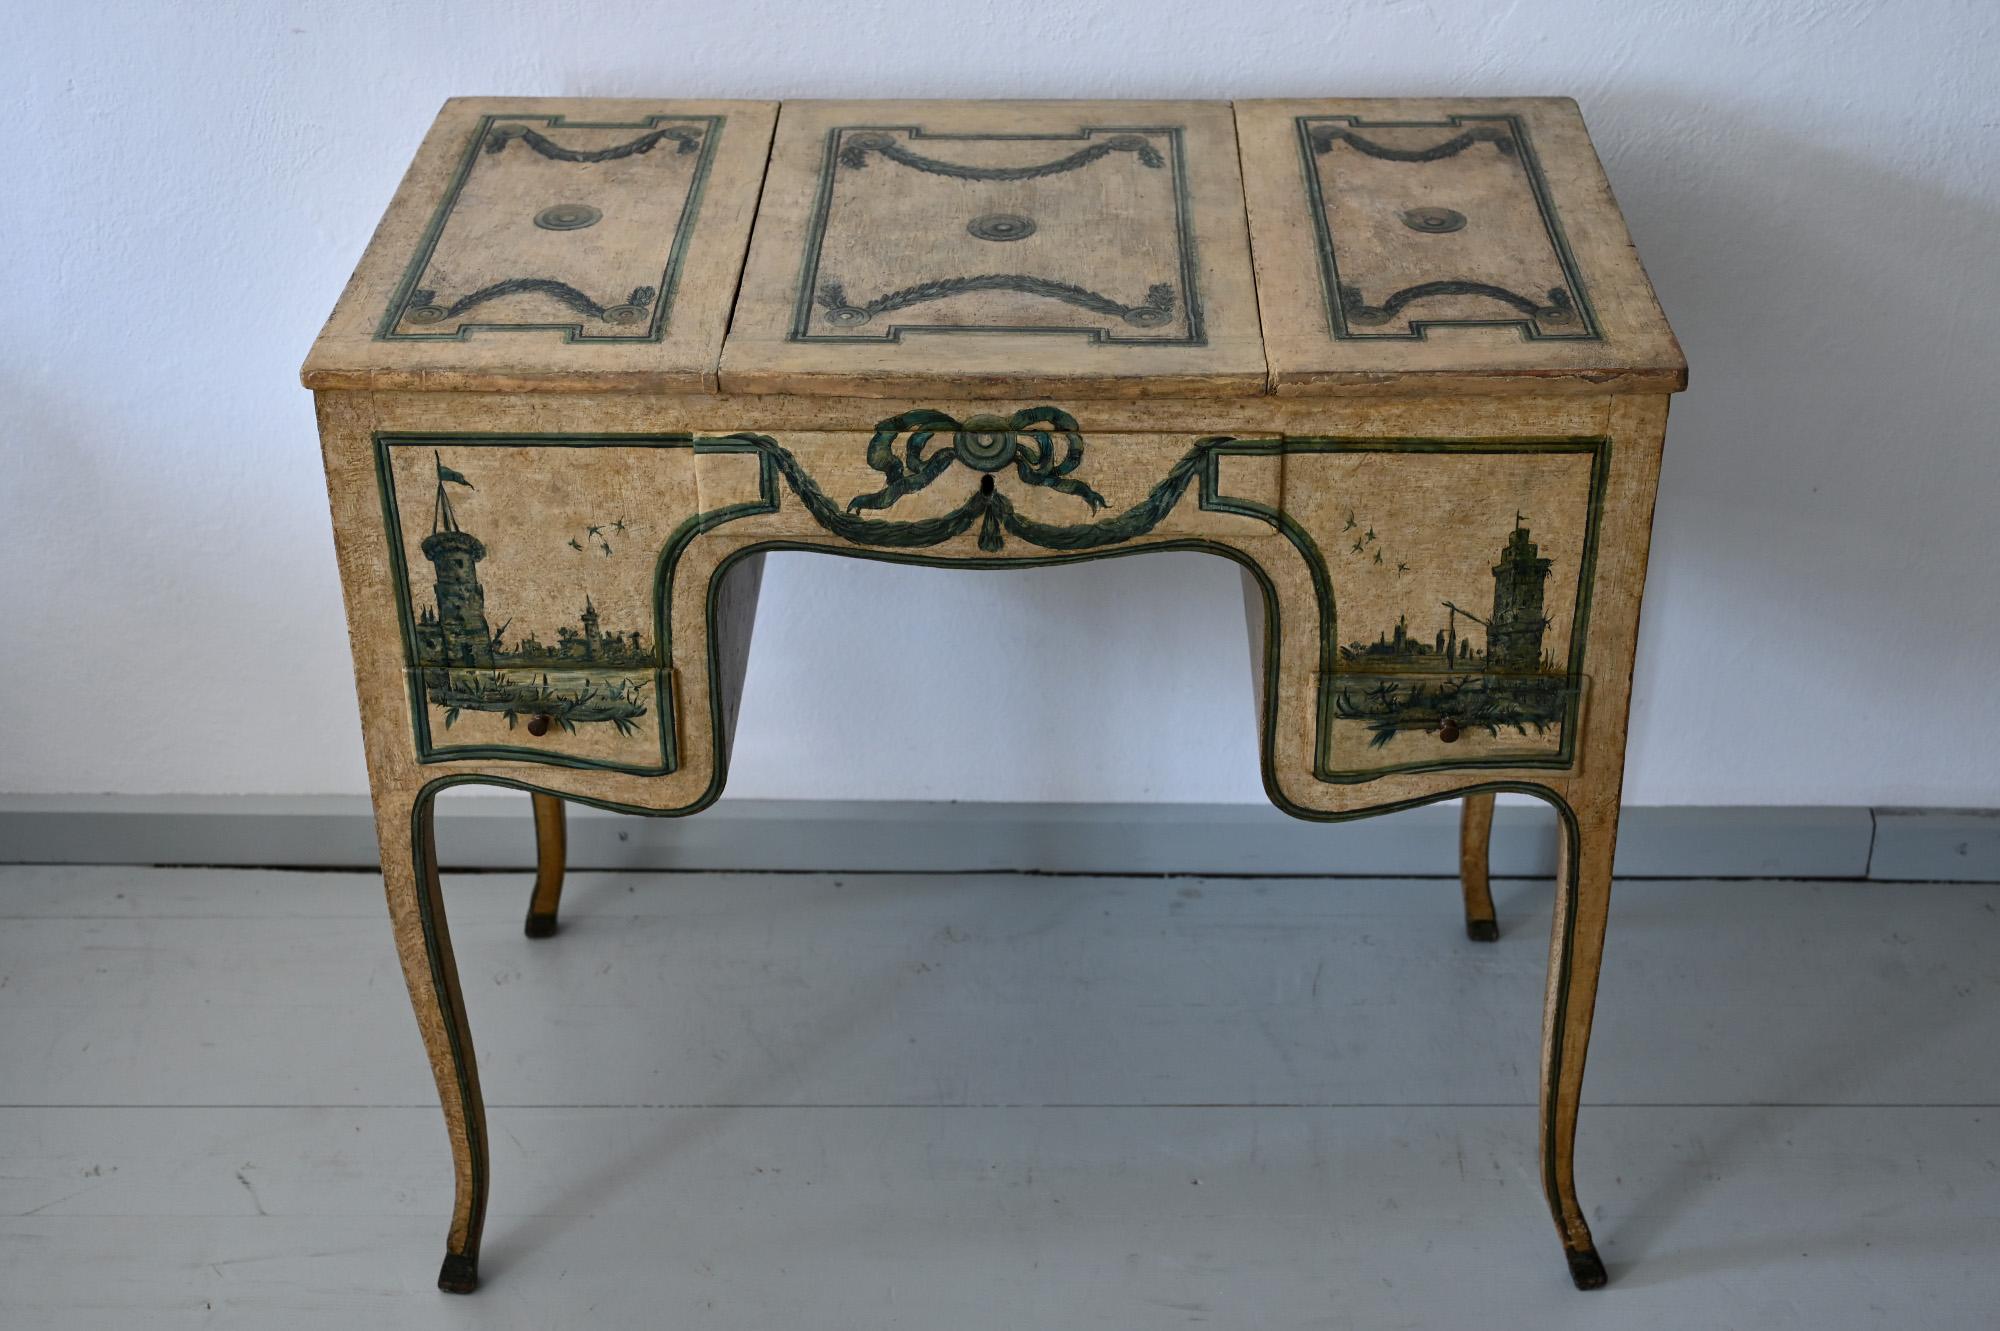 Small, rare piece of furniture, poudreuse or small desk or to be used as a console table, very finely painted on all sides.
Italy Piedmont around 1760/70
With its original painting in green and blue the desk has got an very special look. On the